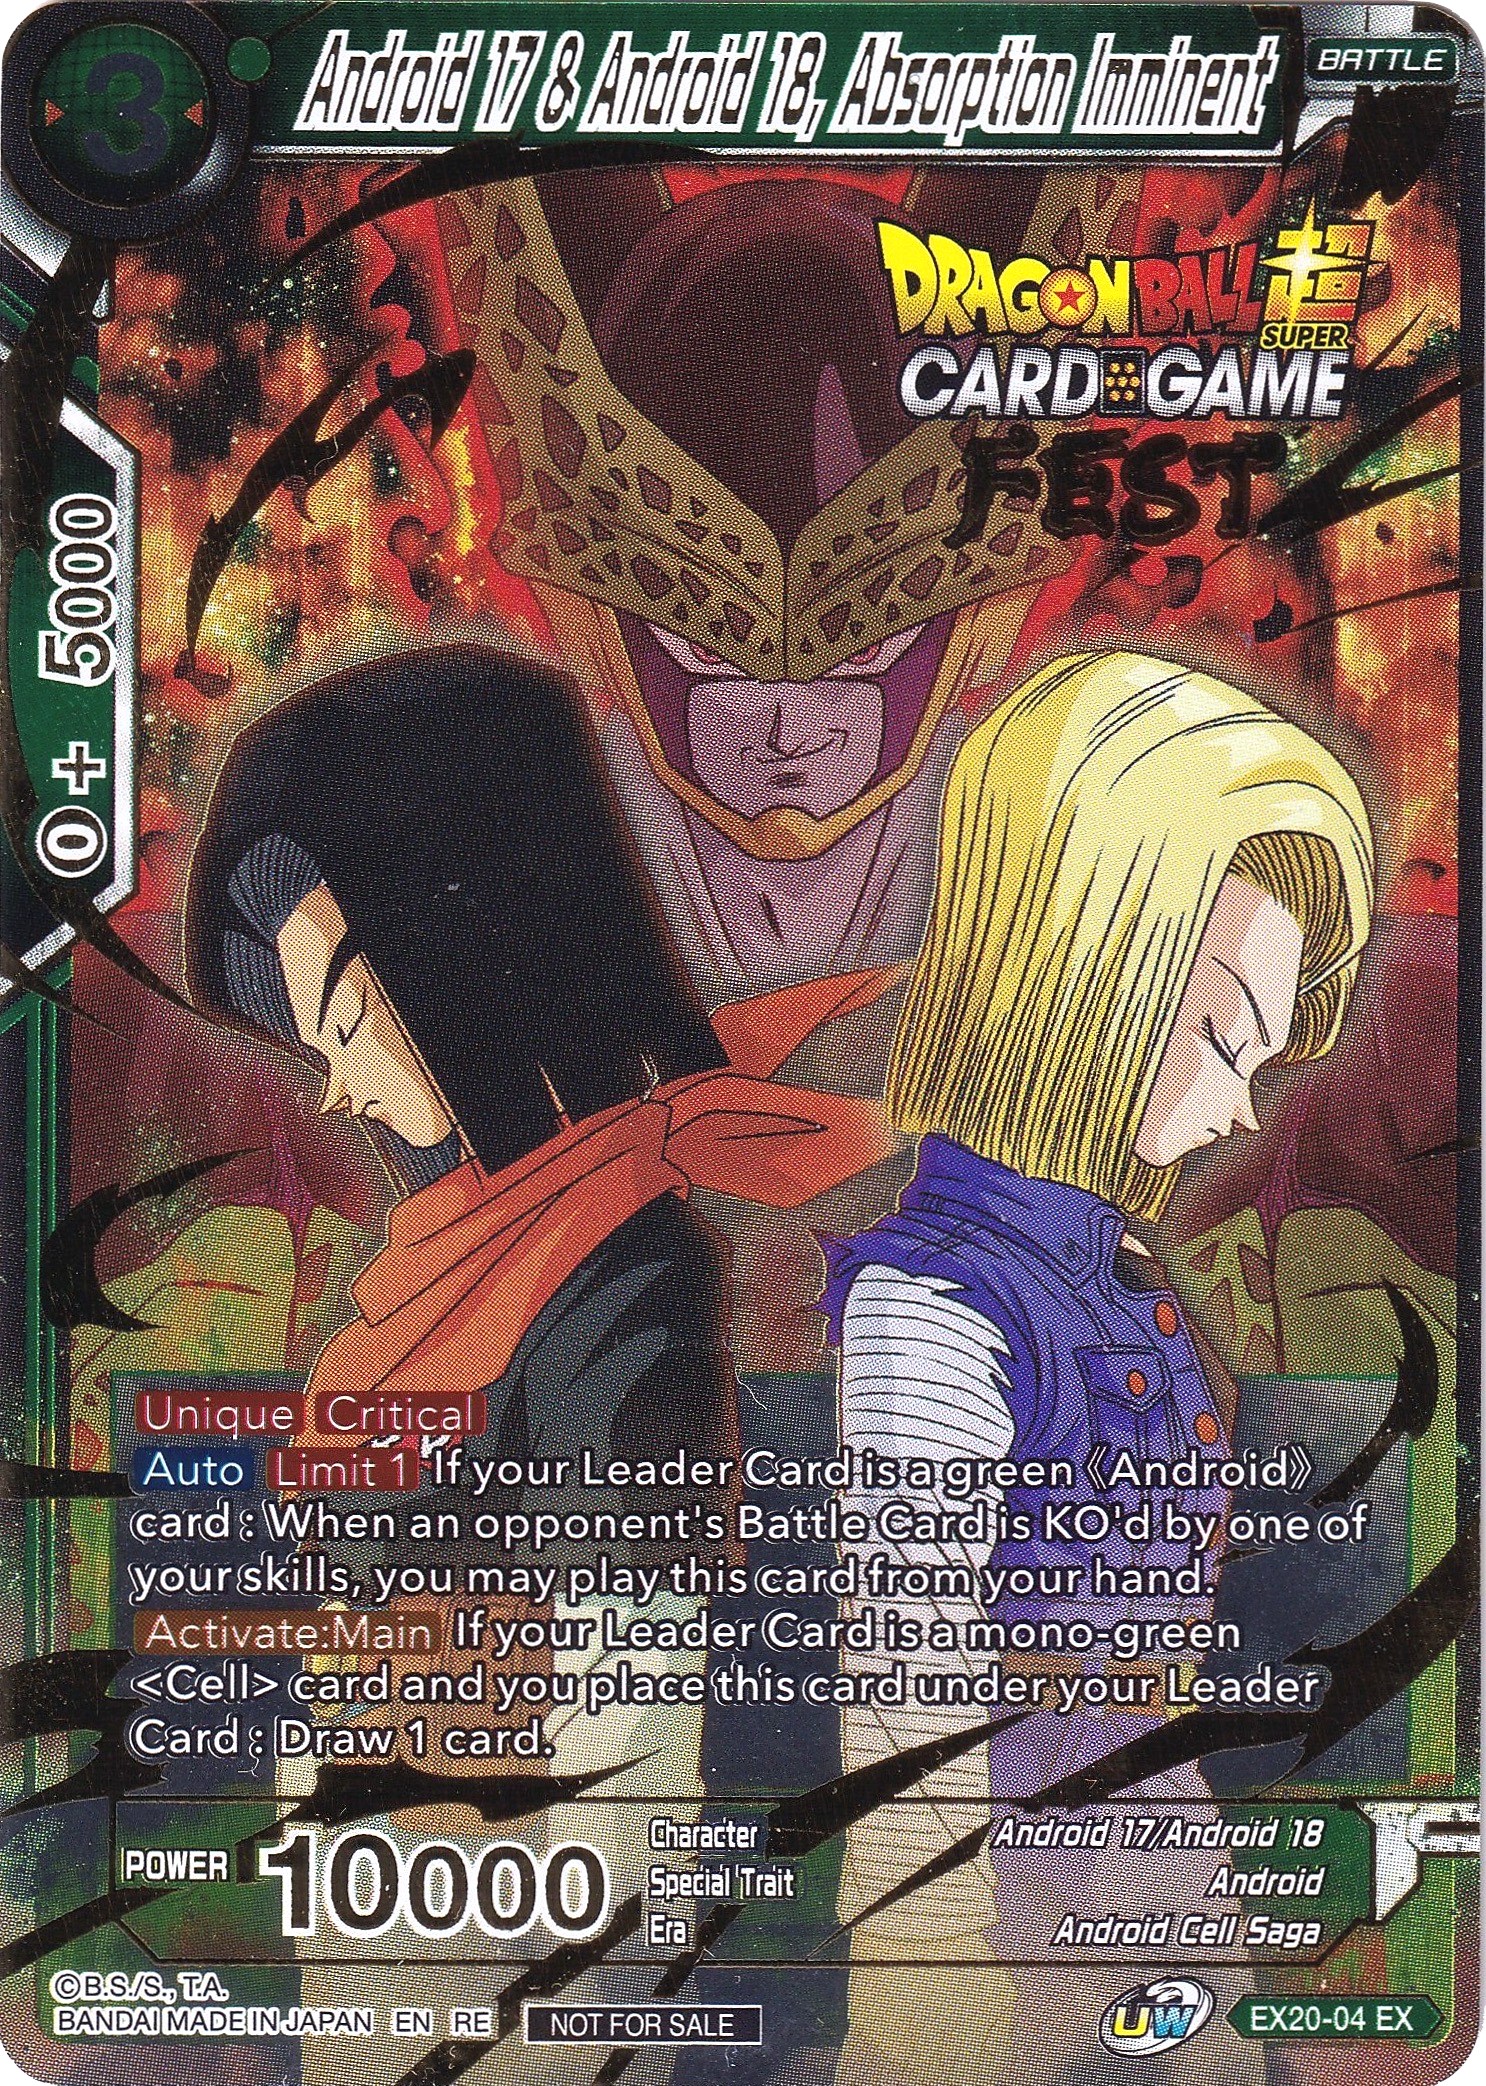 Android 17 & Android 18, Absorption Imminent (Card Game Fest 2022)